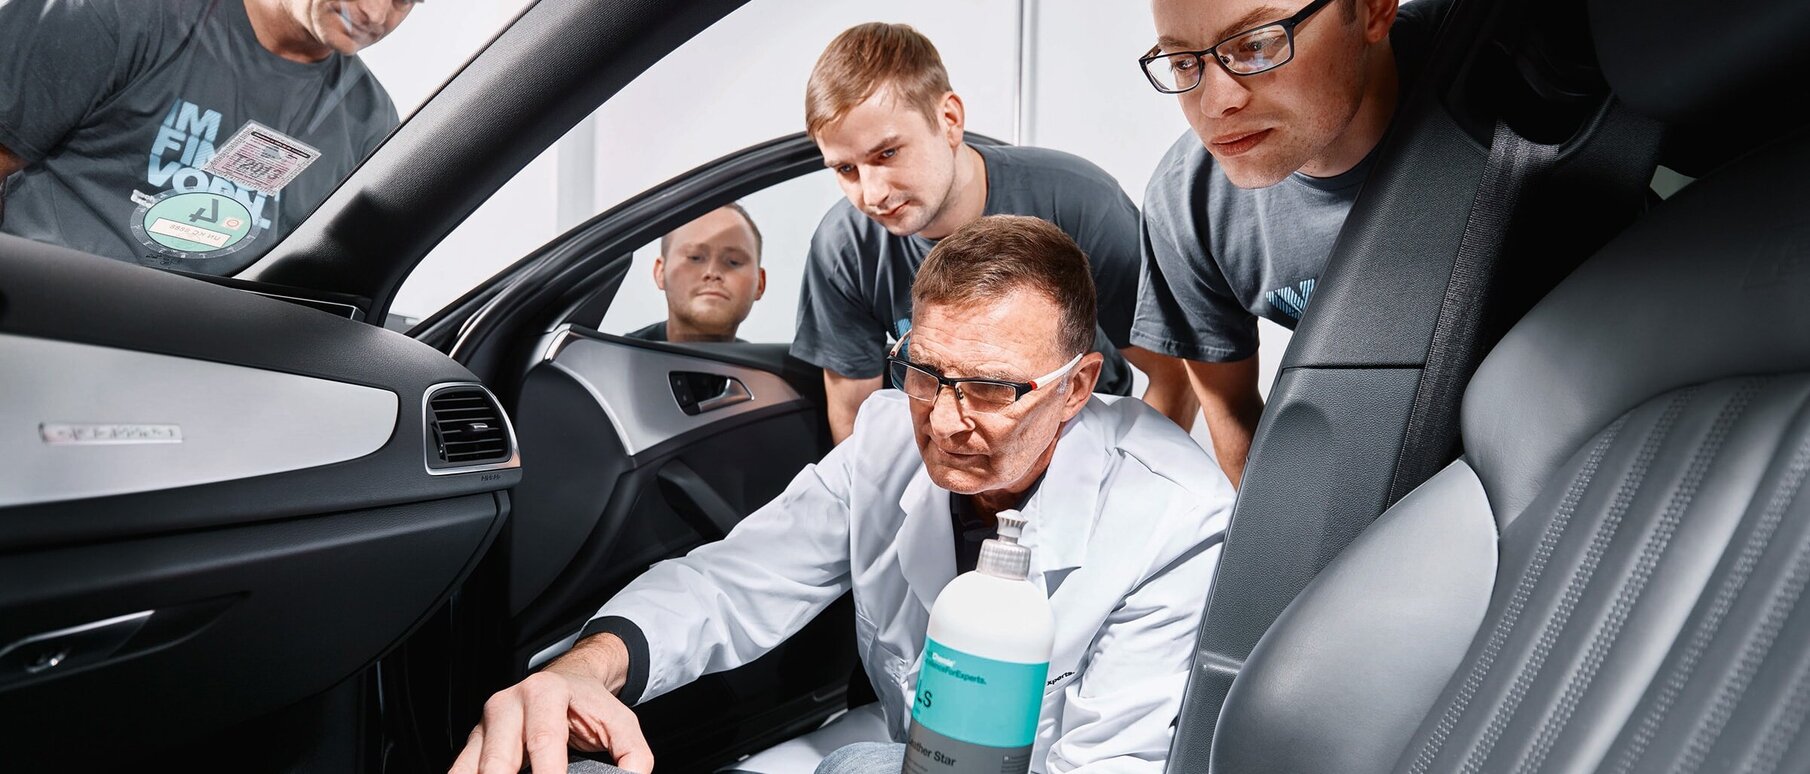 Employee showing how to apply leather care on a car seat